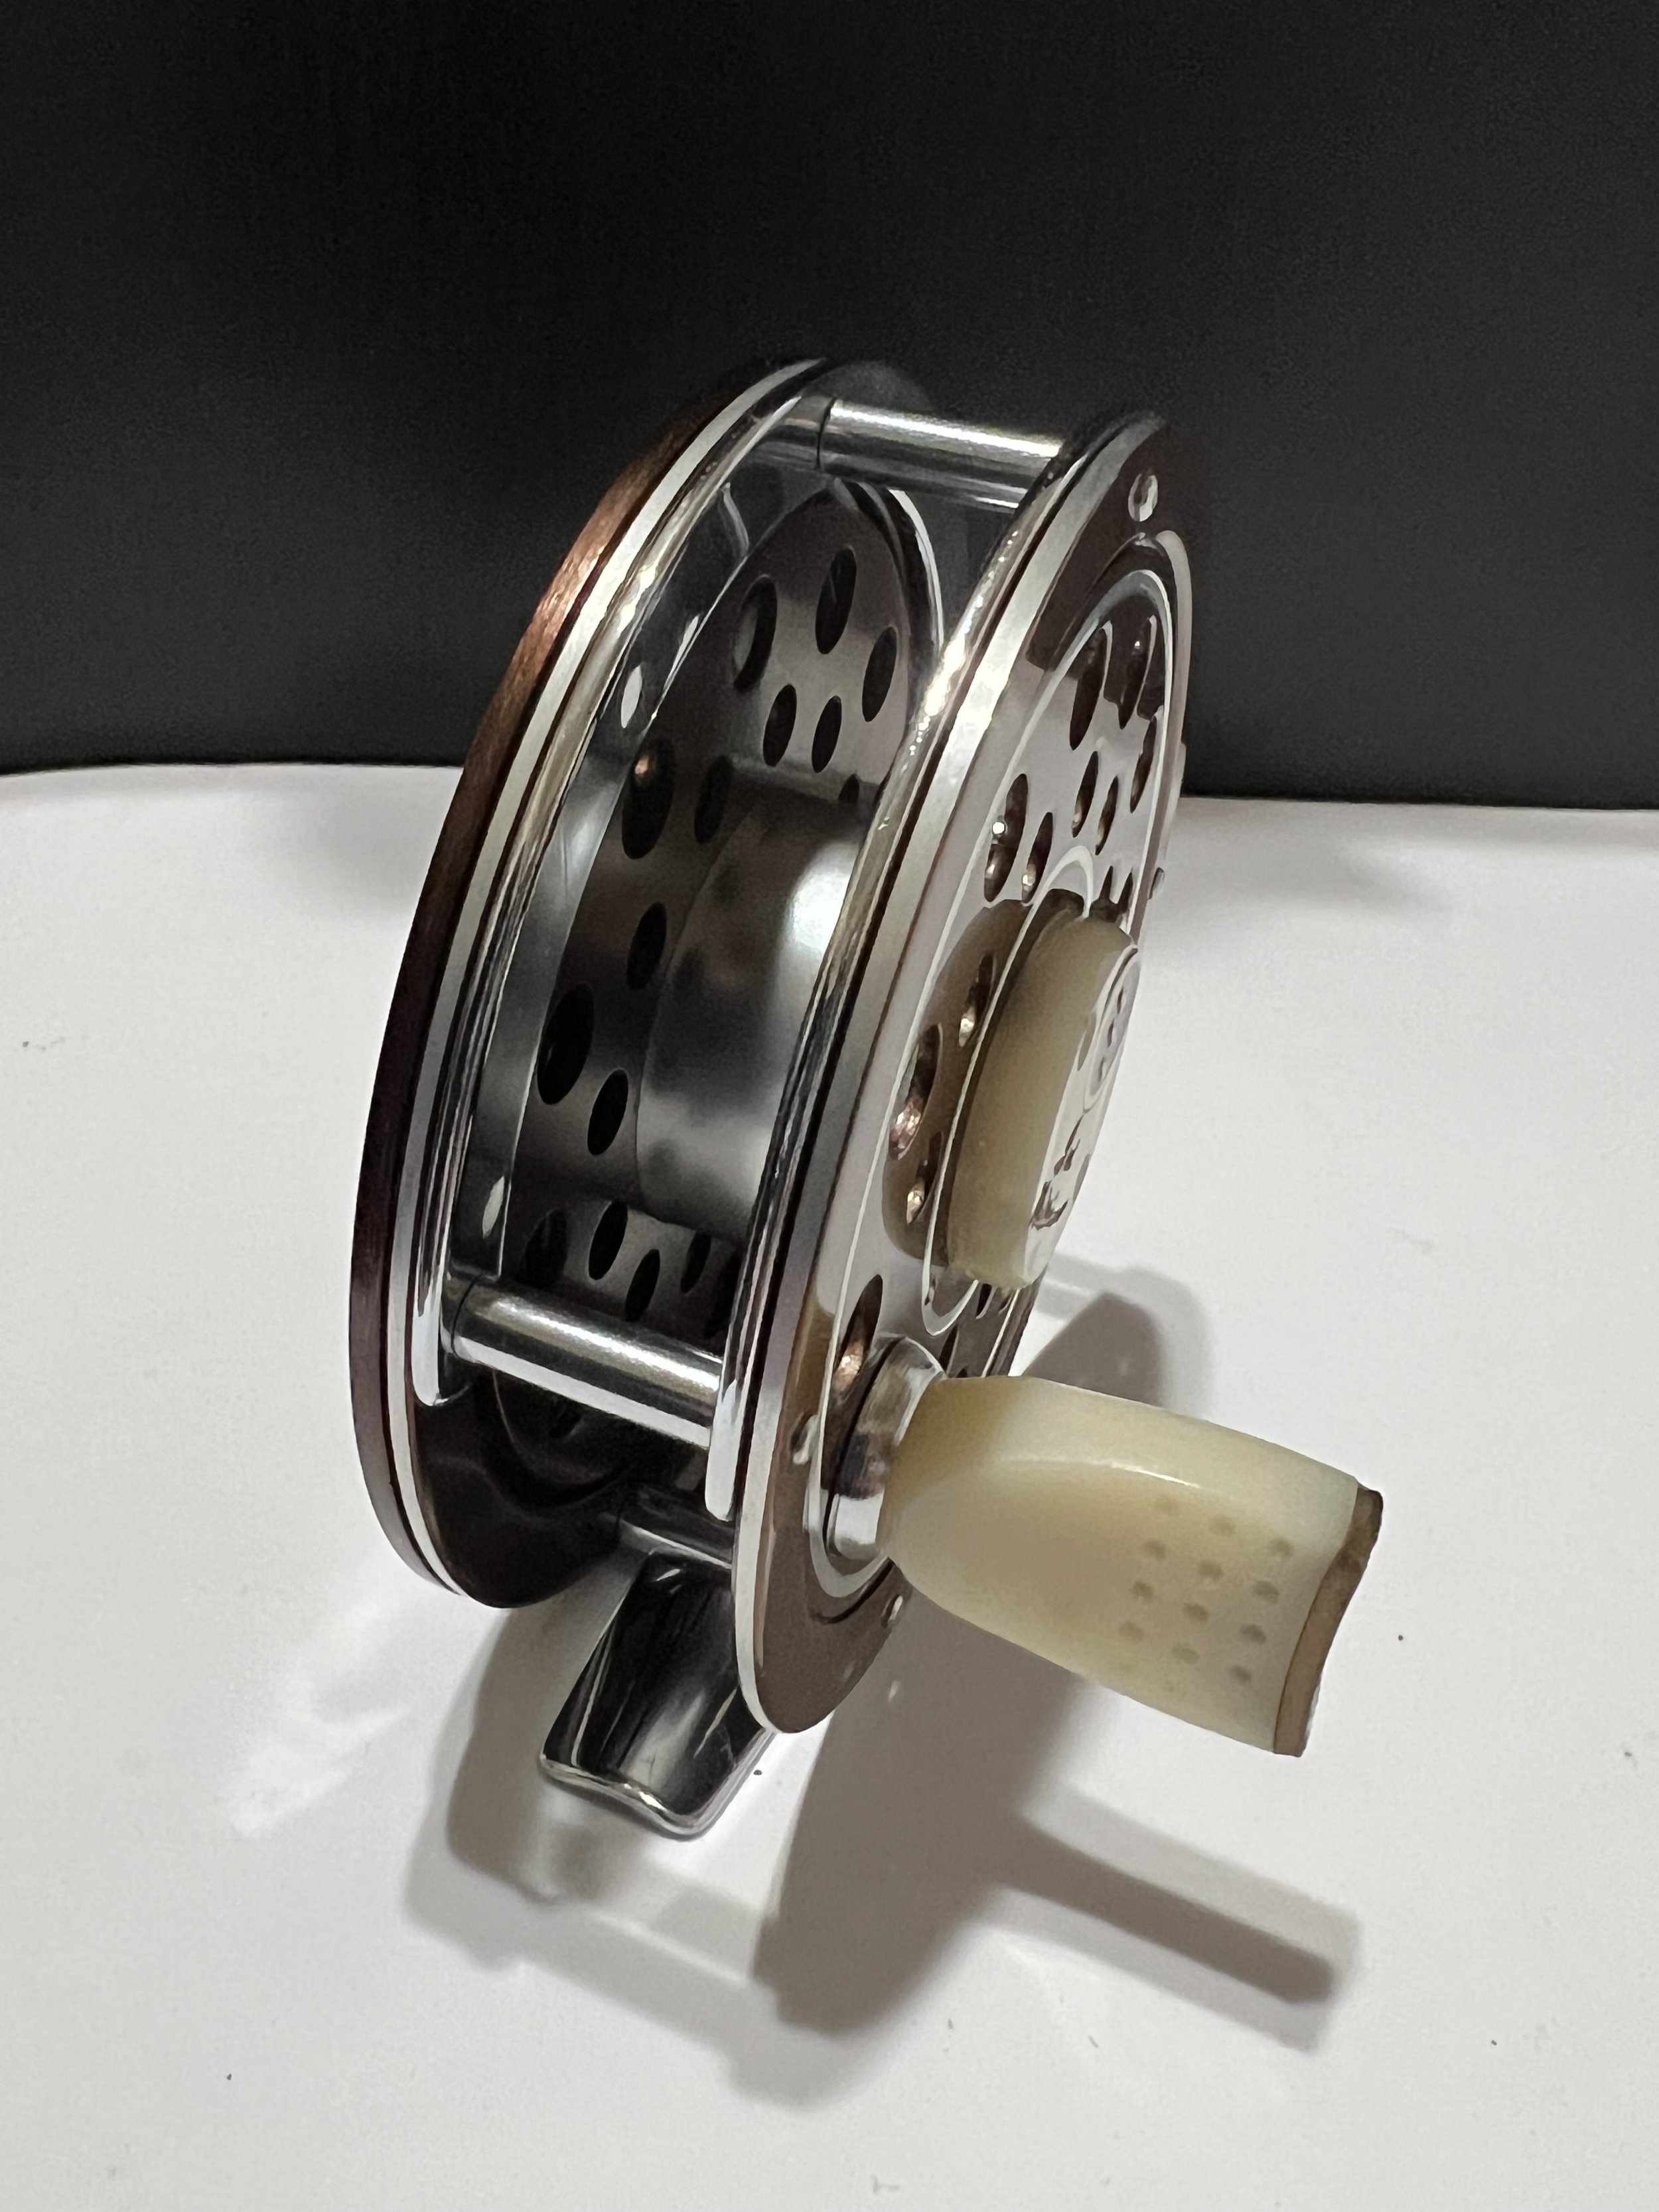 South Bend 1120 Single Action Fly Reel Reversible with Original Box  Circa-1960 — VINTAGE FISHING REELS